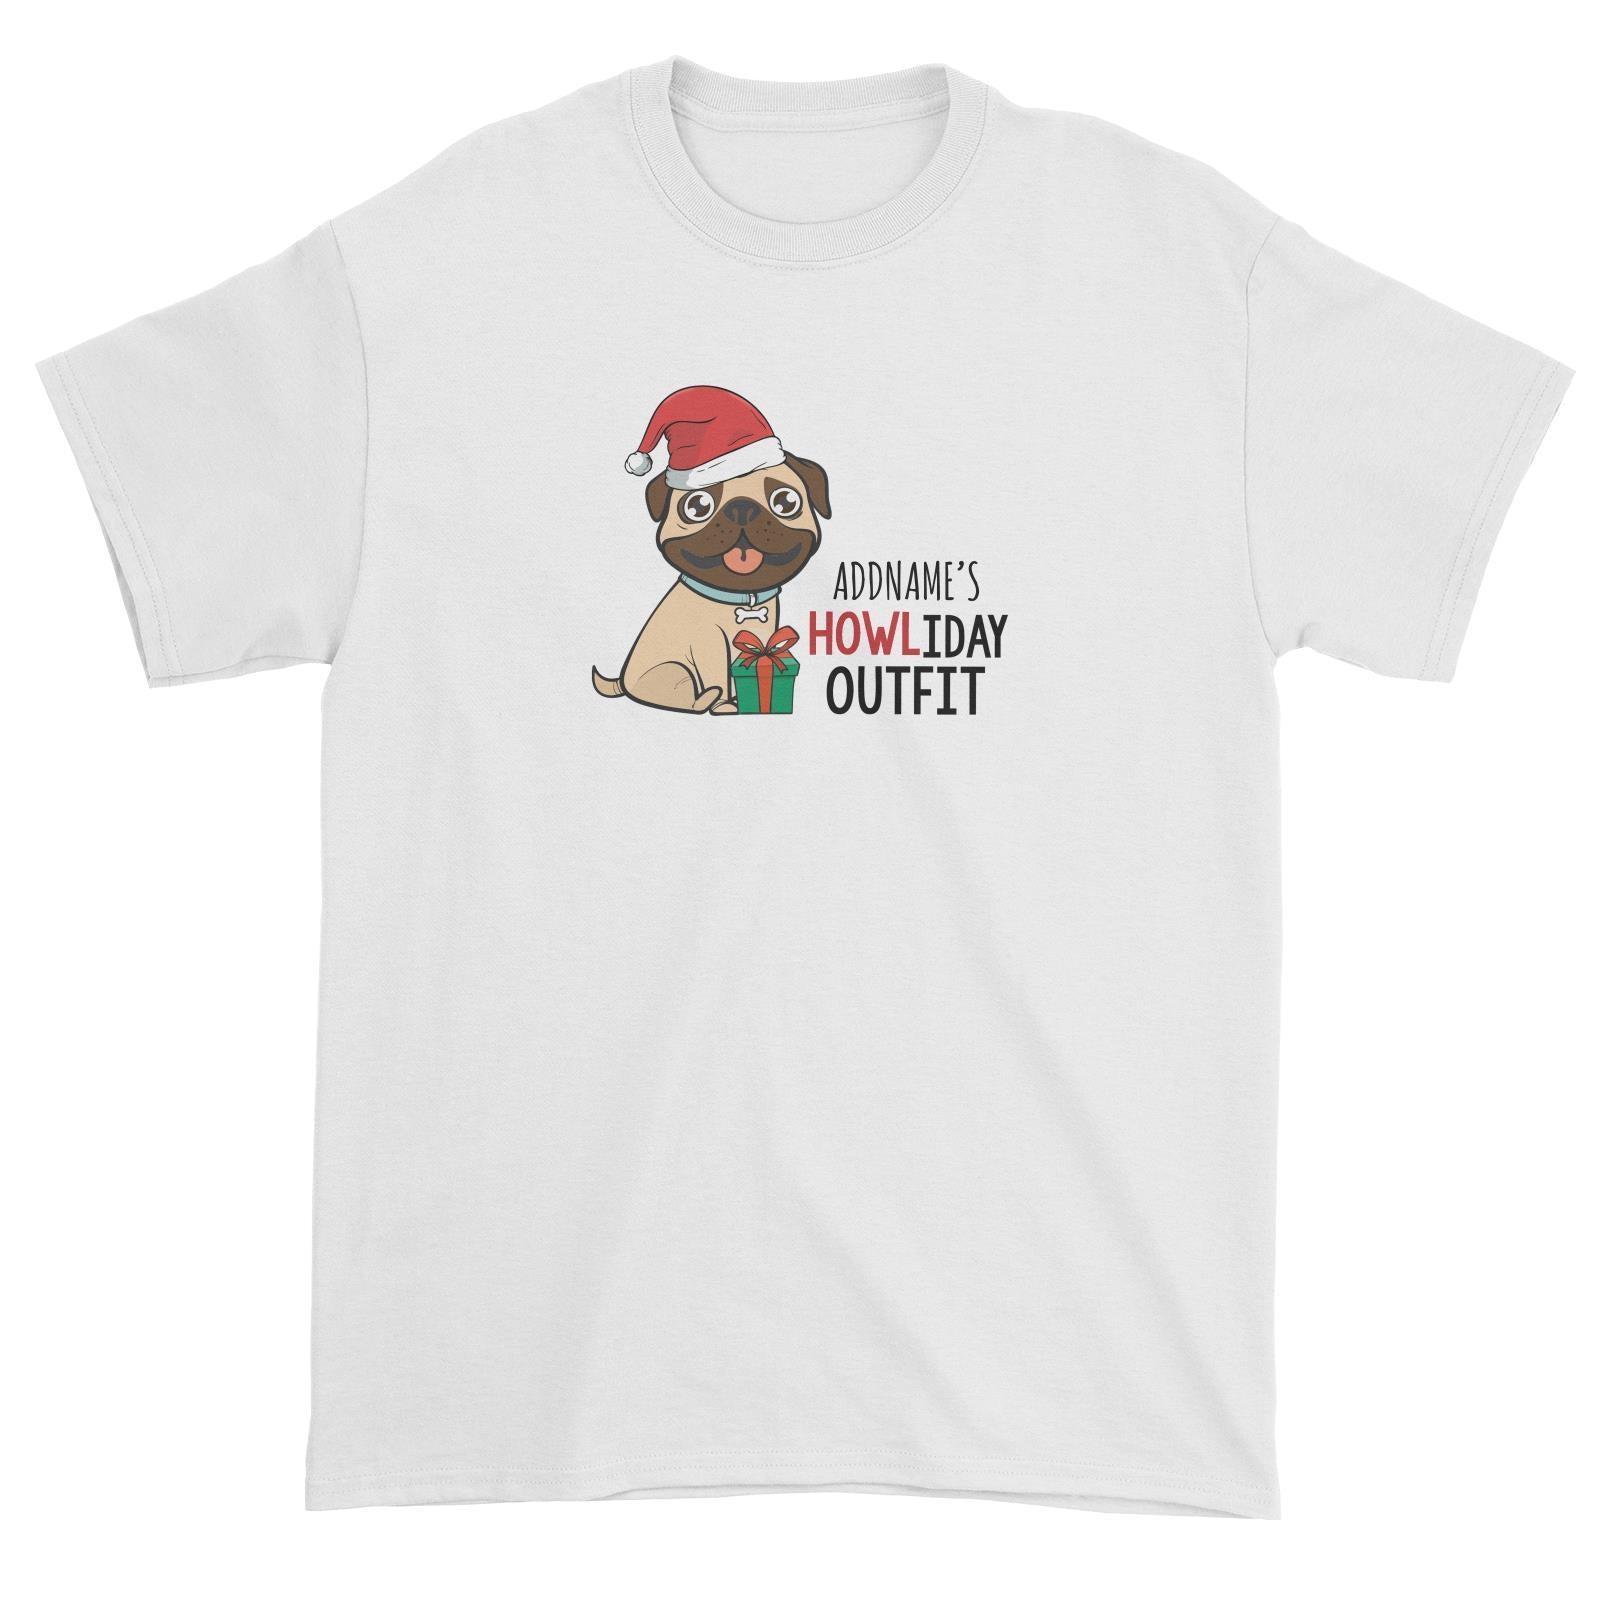 Cute Pug Addname's Howliday Outfit Unisex T-Shirt Christmas Animal Funny Personalizable Designs